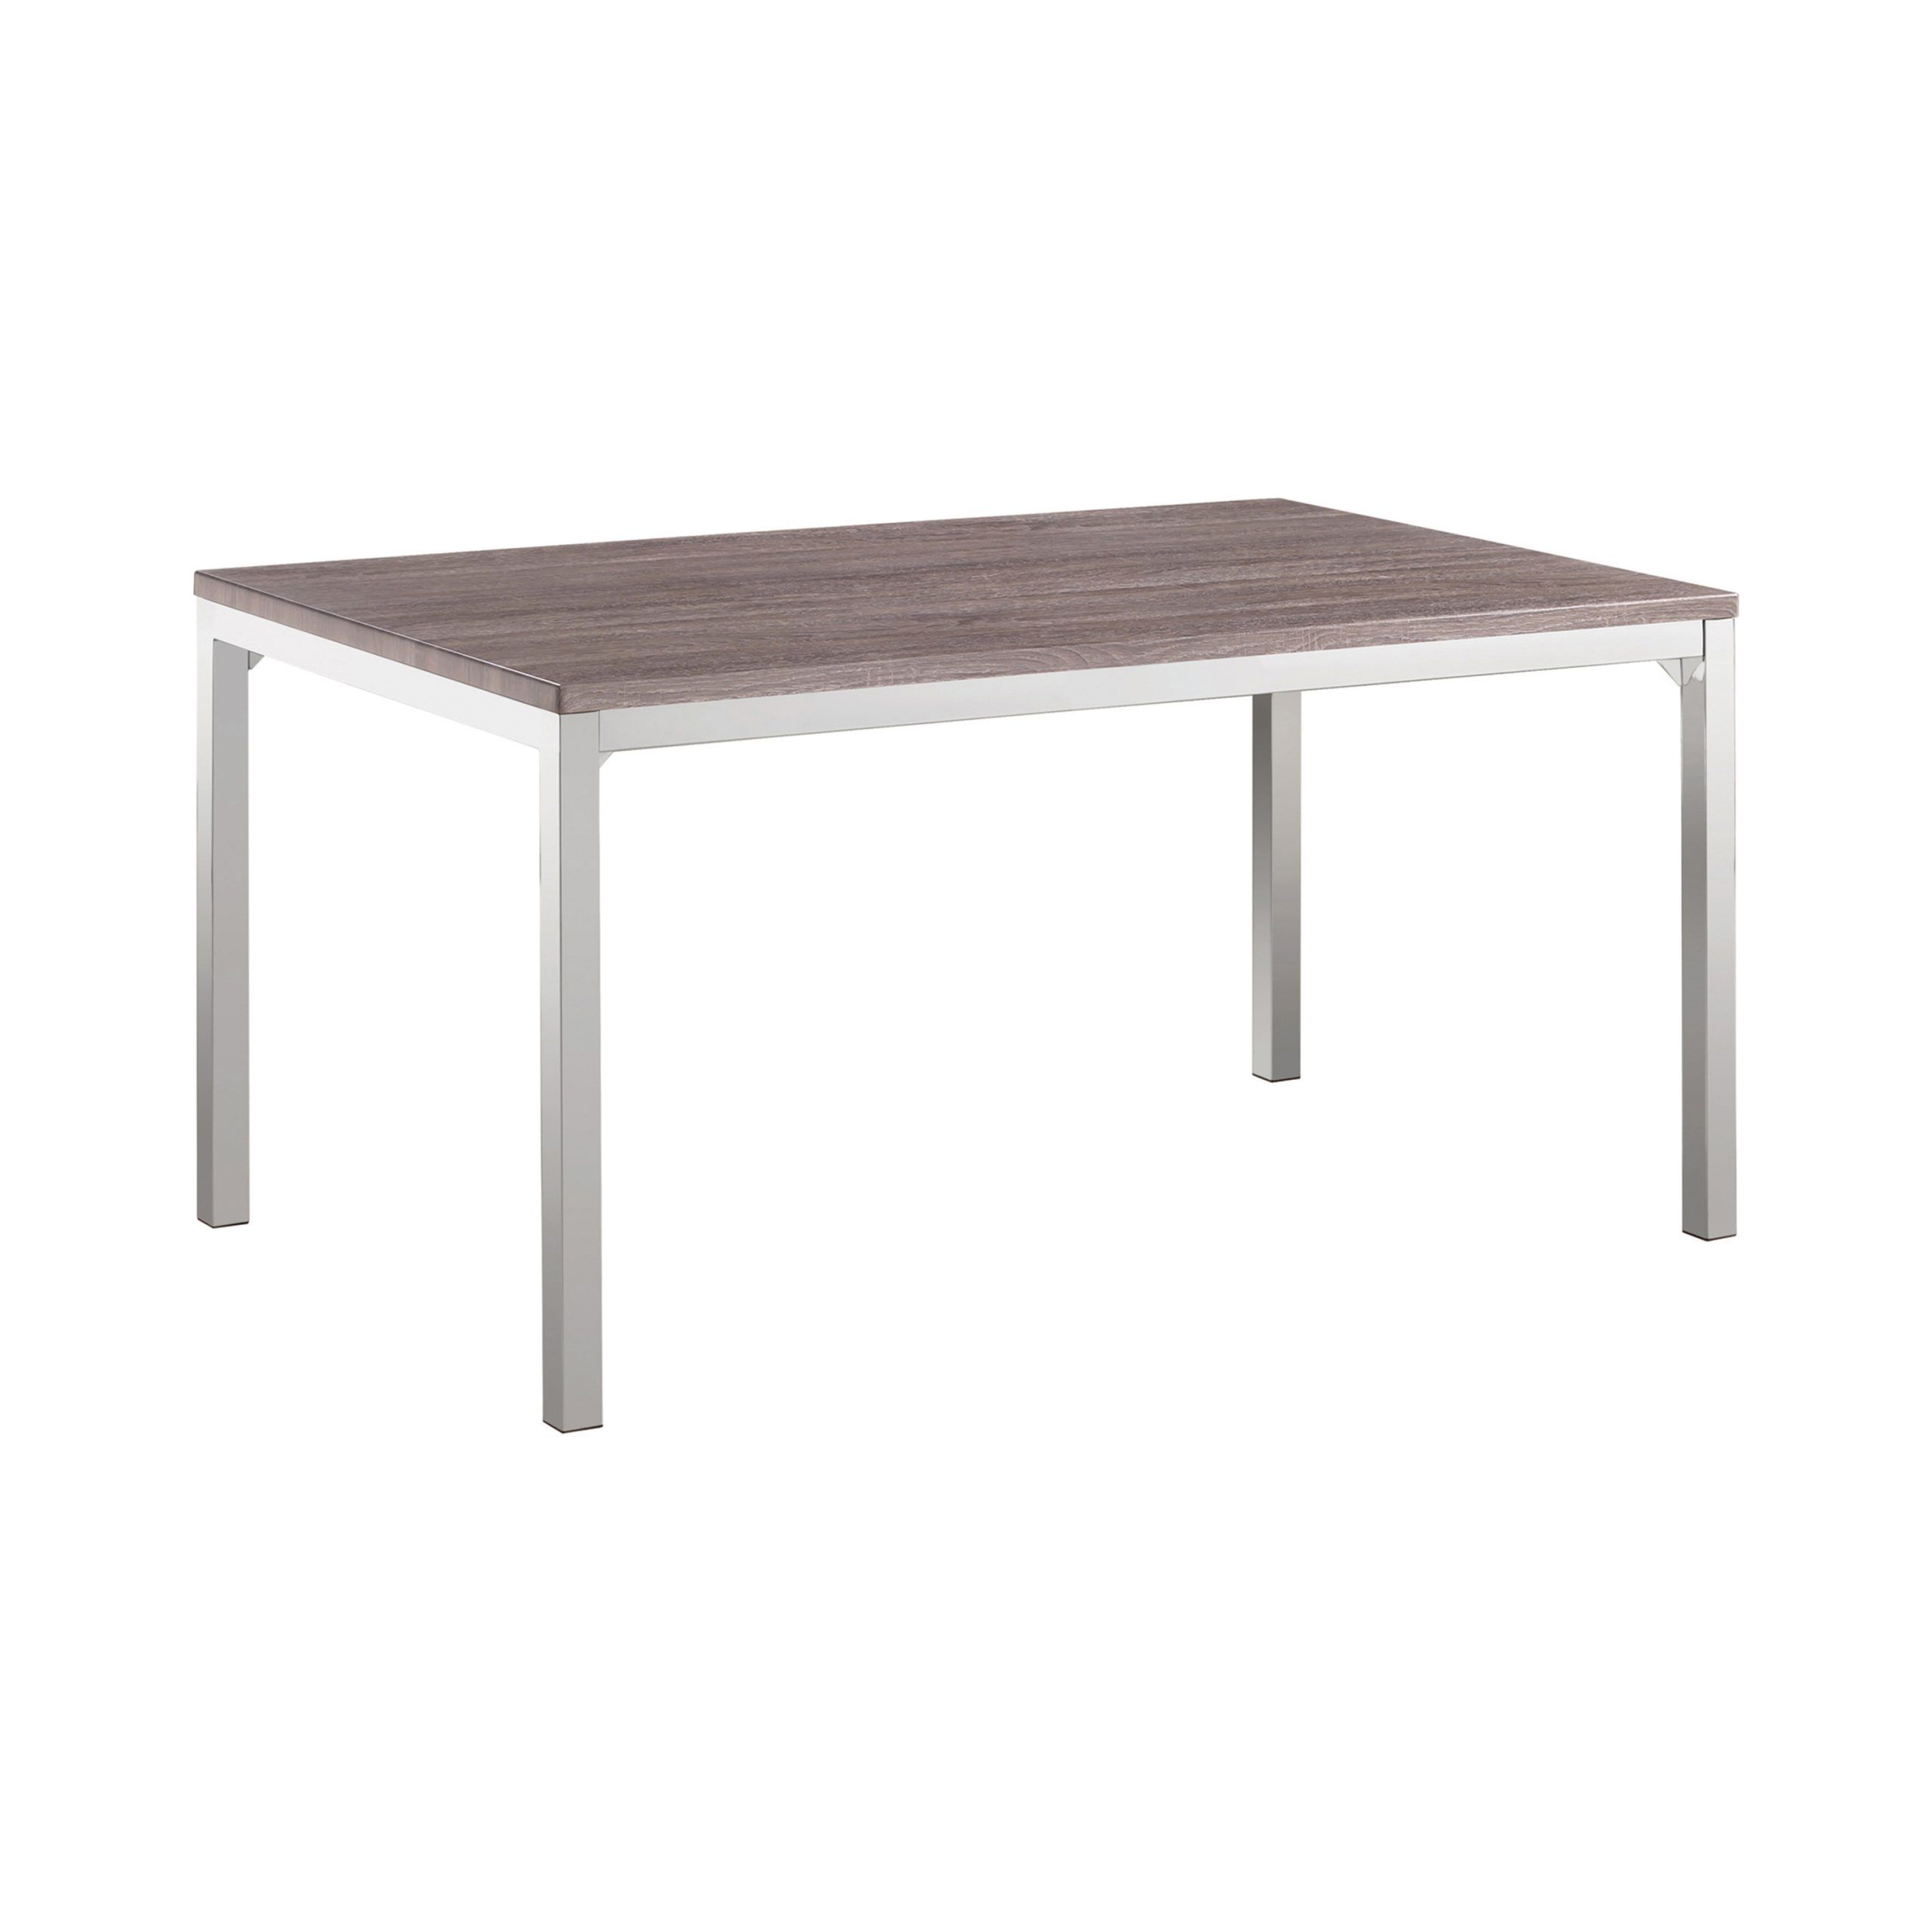 Chrome Contemporary Square Casual Dining Tables For Well Liked Mckenzie Rectangular Dining Table Weathered Grey And Chrome (View 10 of 25)